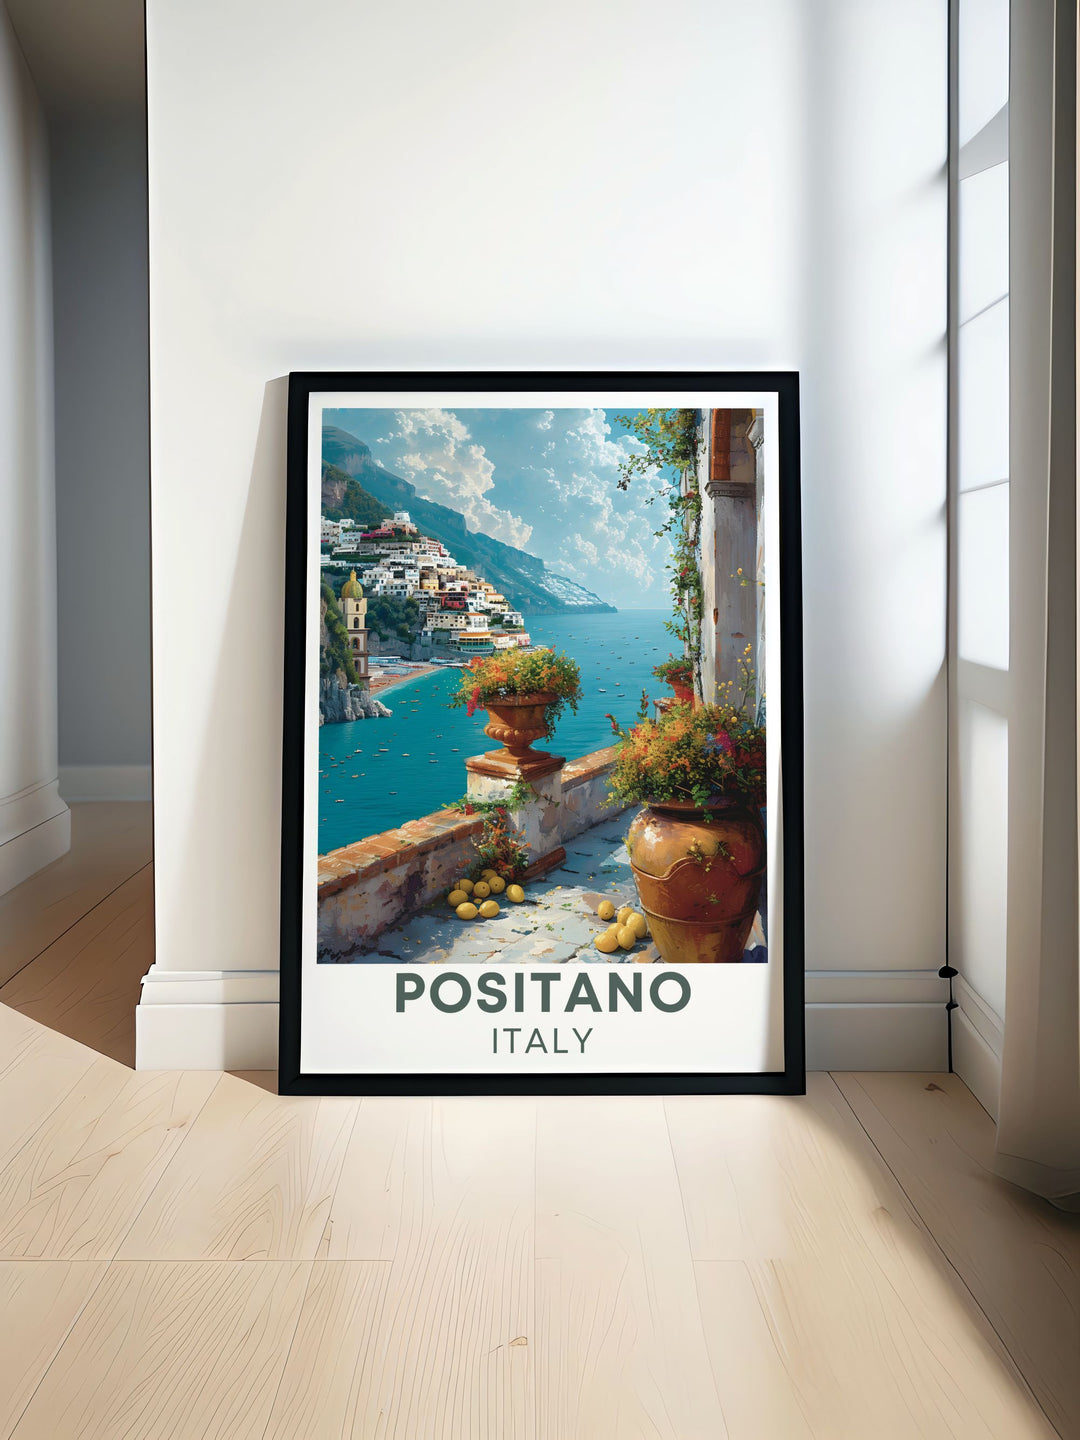 Via Positanesi d America vibrant Positano Art Print capturing the stunning coastal scenery of the Amalfi Coast perfect for enhancing home decor with a touch of Italian elegance ideal for living room or bedroom wall art bringing a piece of Italy into your space